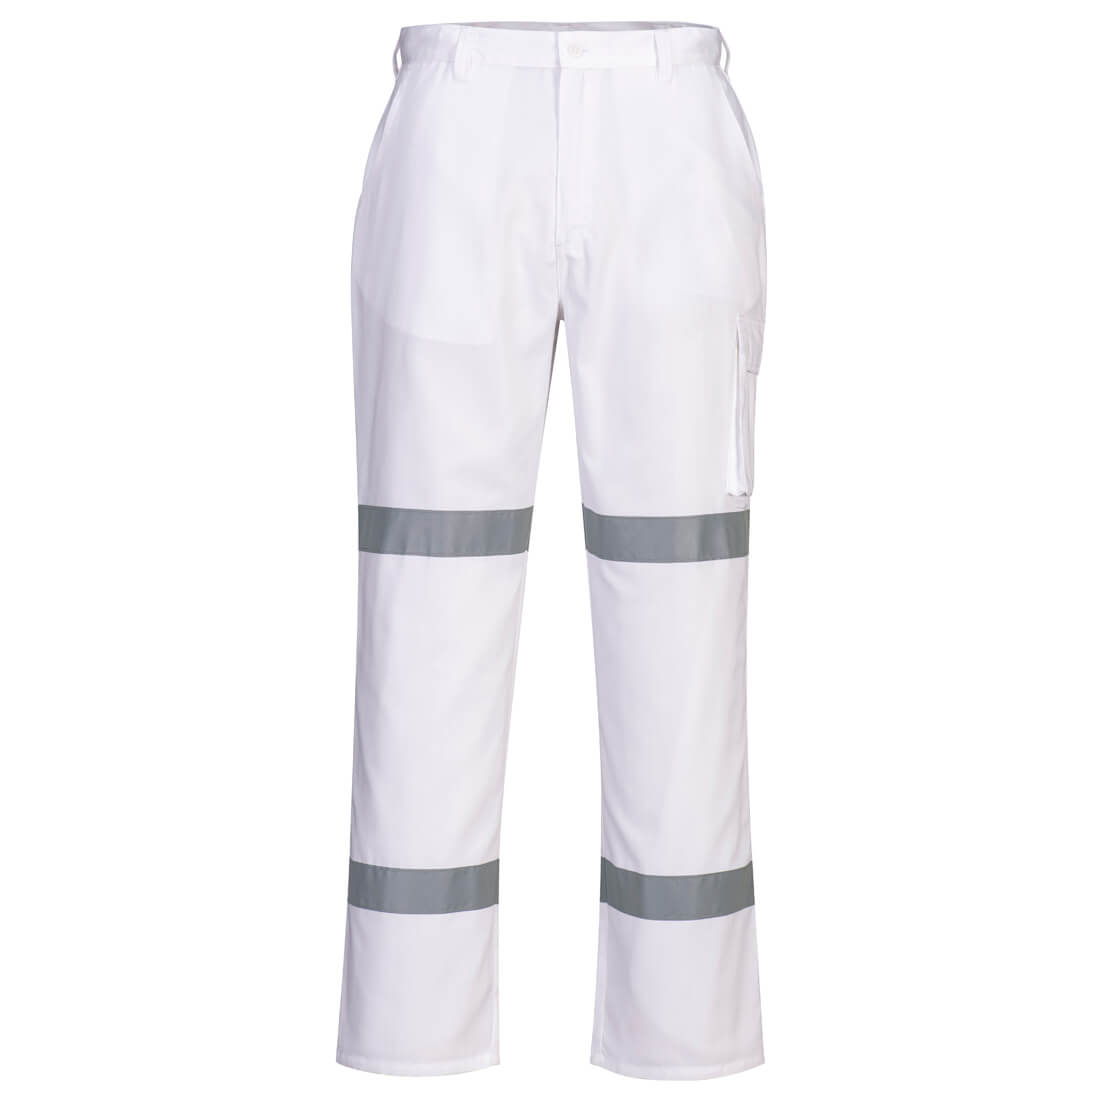 Portwest Taped Night Cotton Drill Pants (MP709)